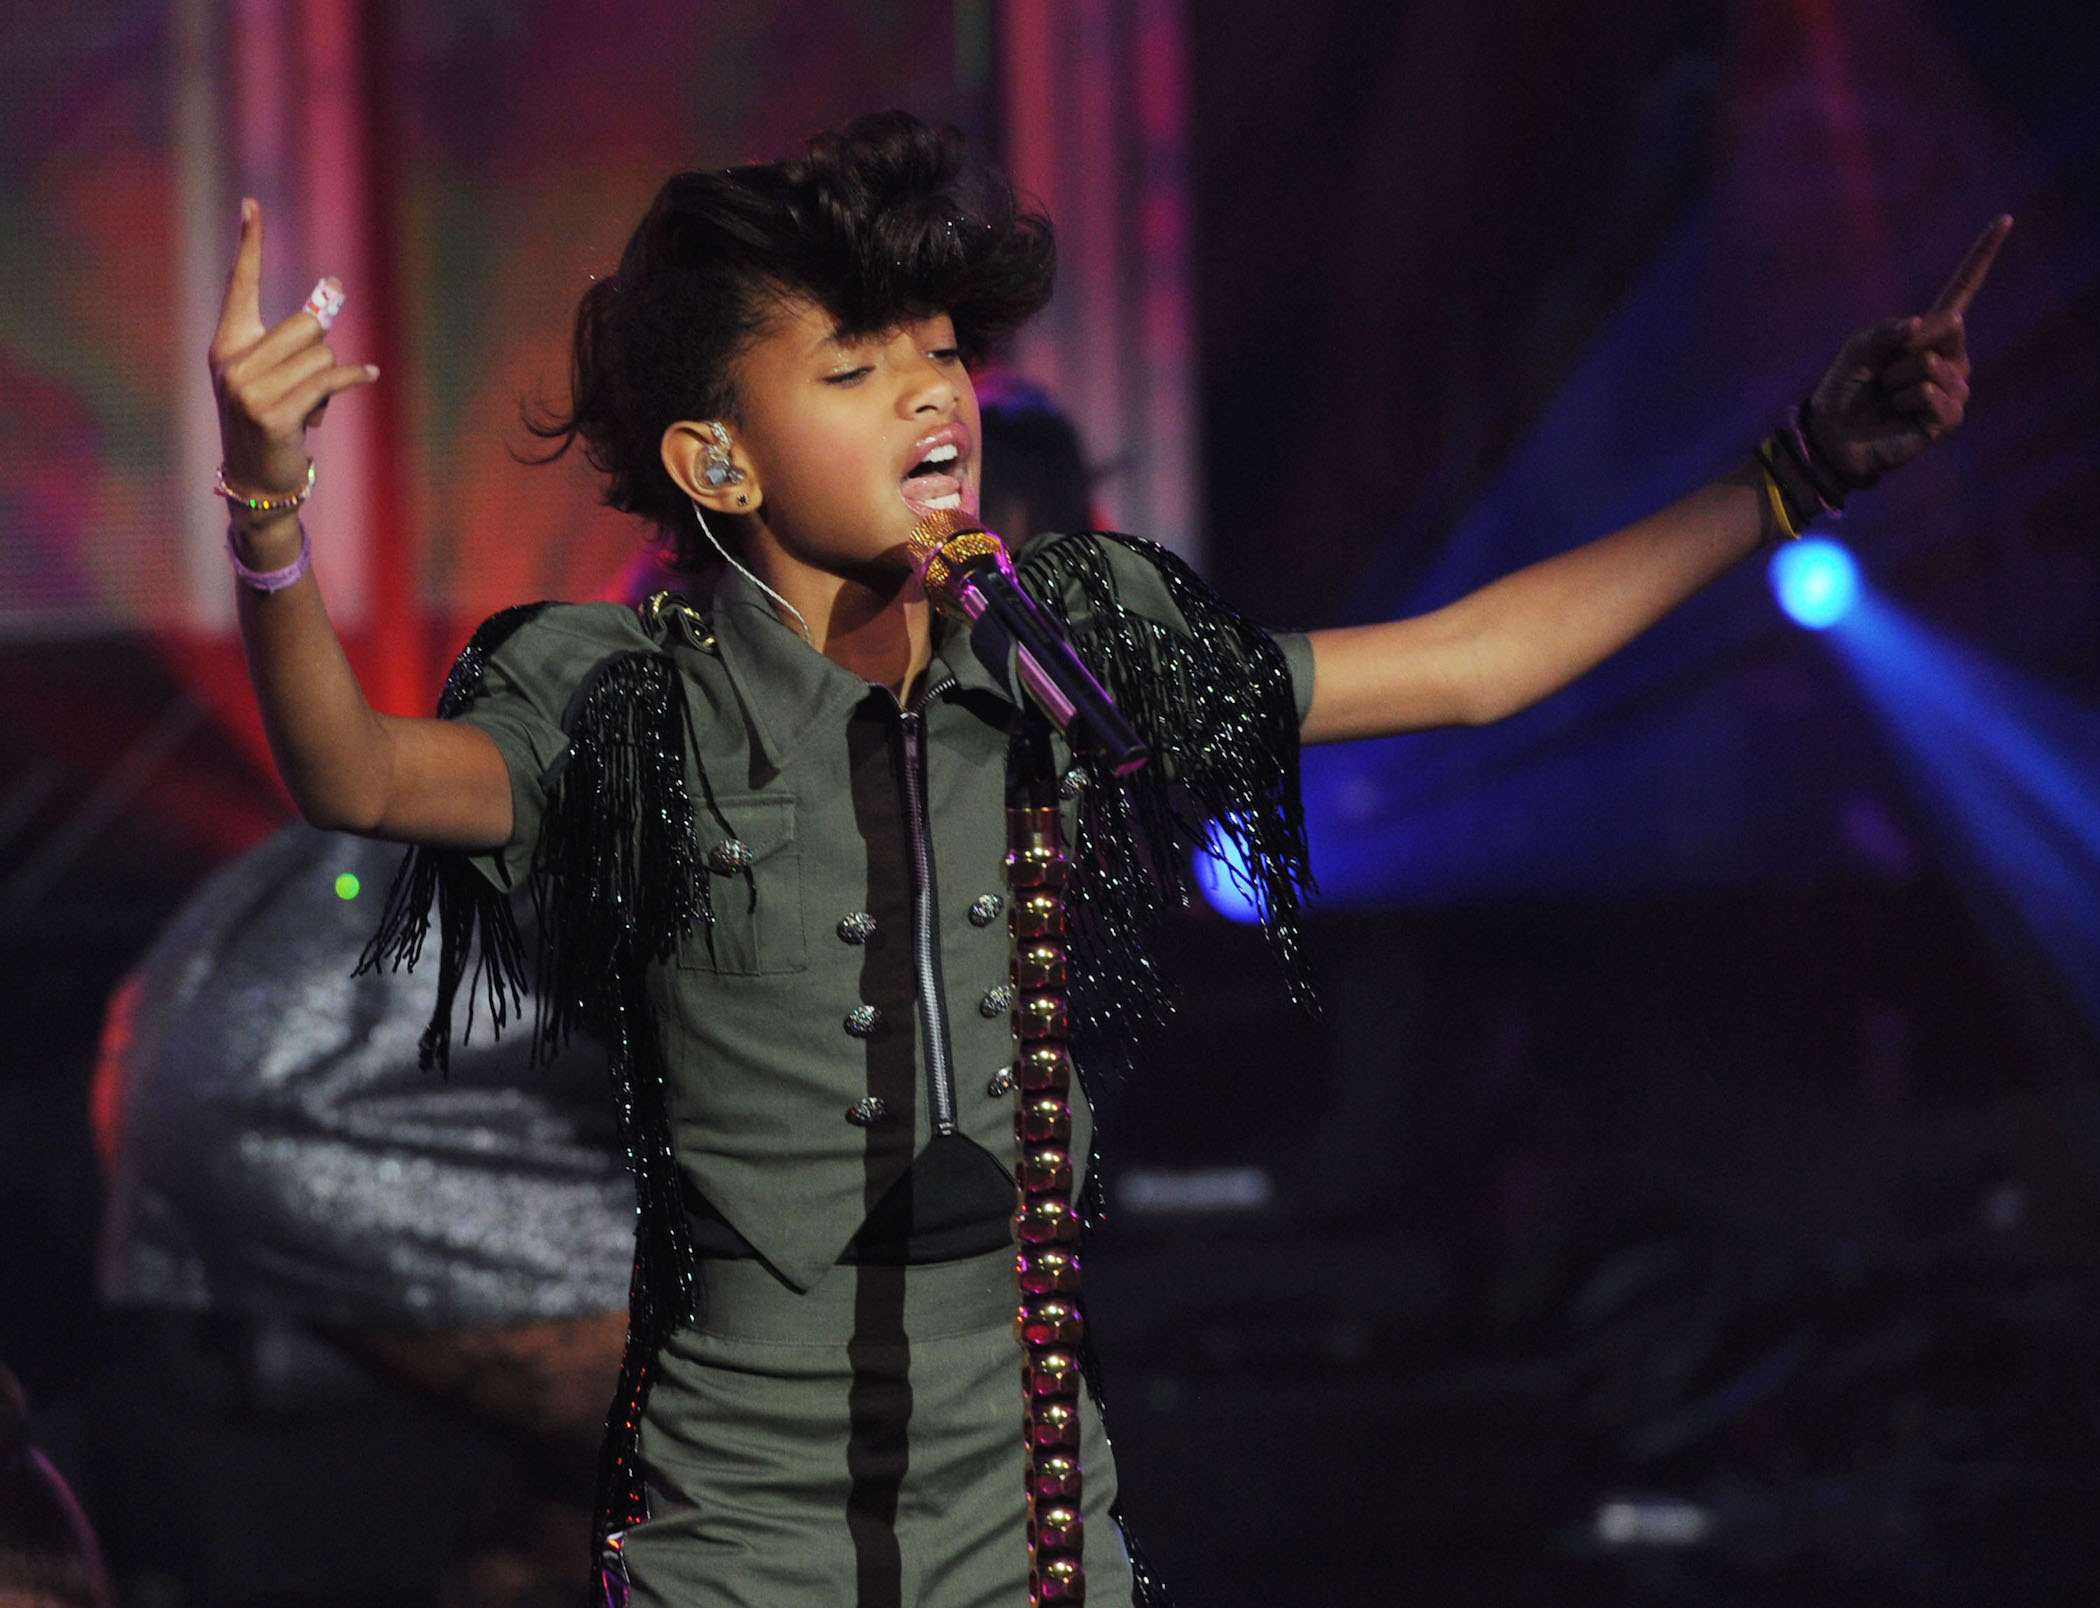 Willow Smith performs onstage during Dick Clark's New Year's Rockin' Eve With Ryan Seacrest in 2011 